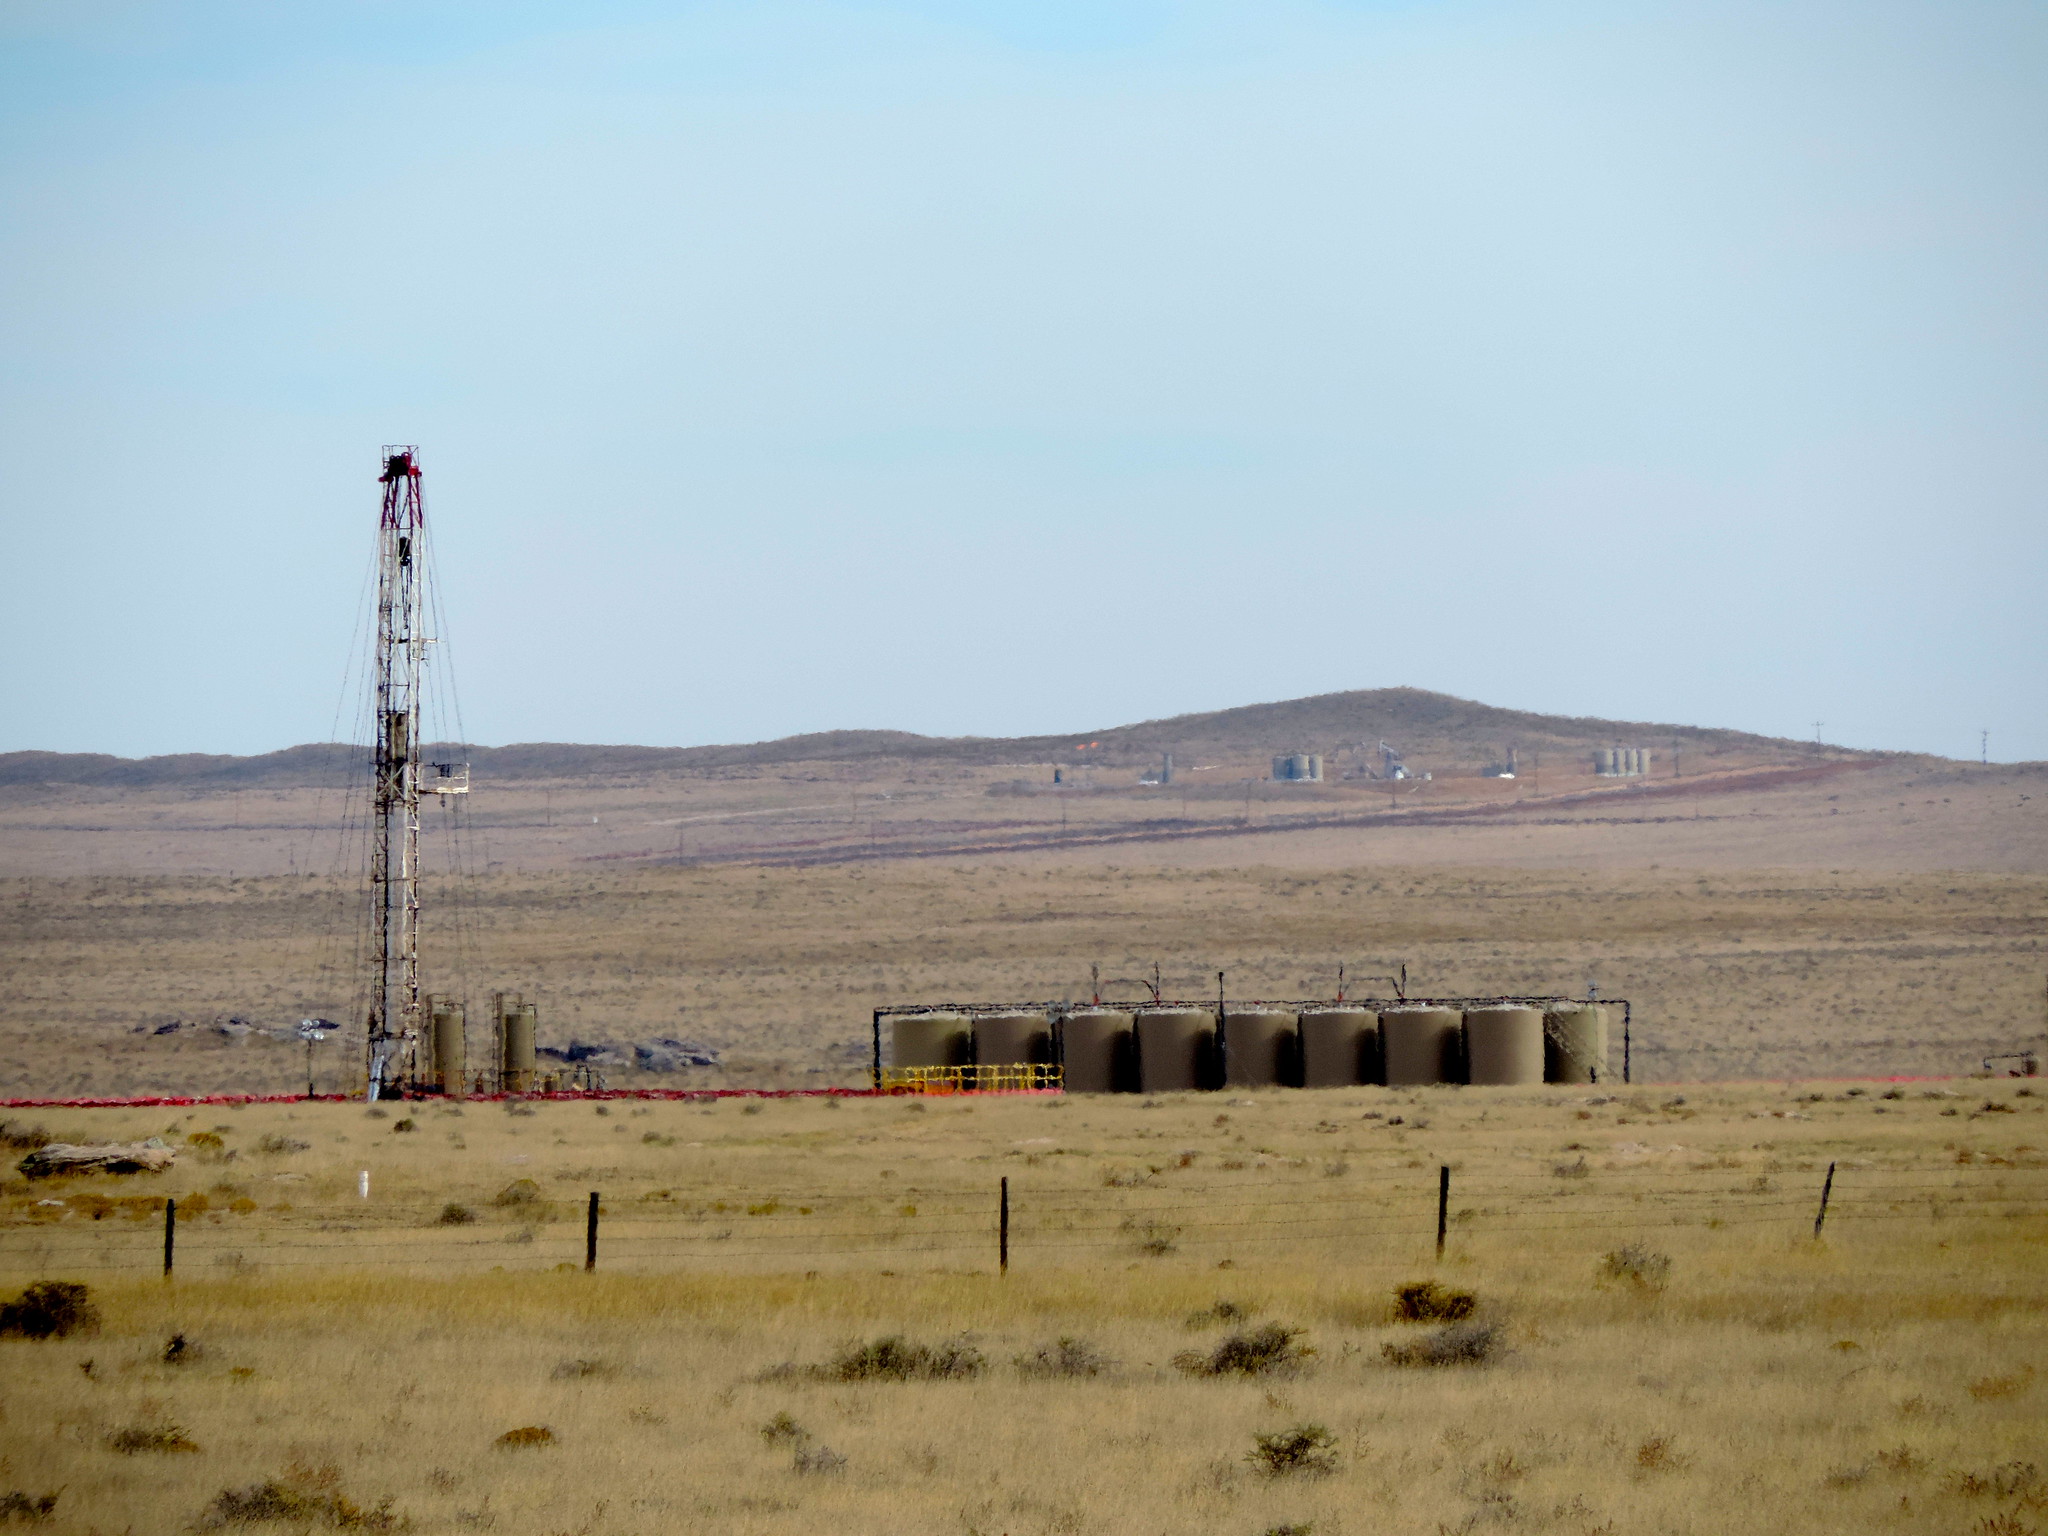 Photograph of a drill right (a metal tower) and a battery of oil tanks on a relatively flat grassland. In the background, a low hill with what appear to be more oil tanks on its slopes rises.